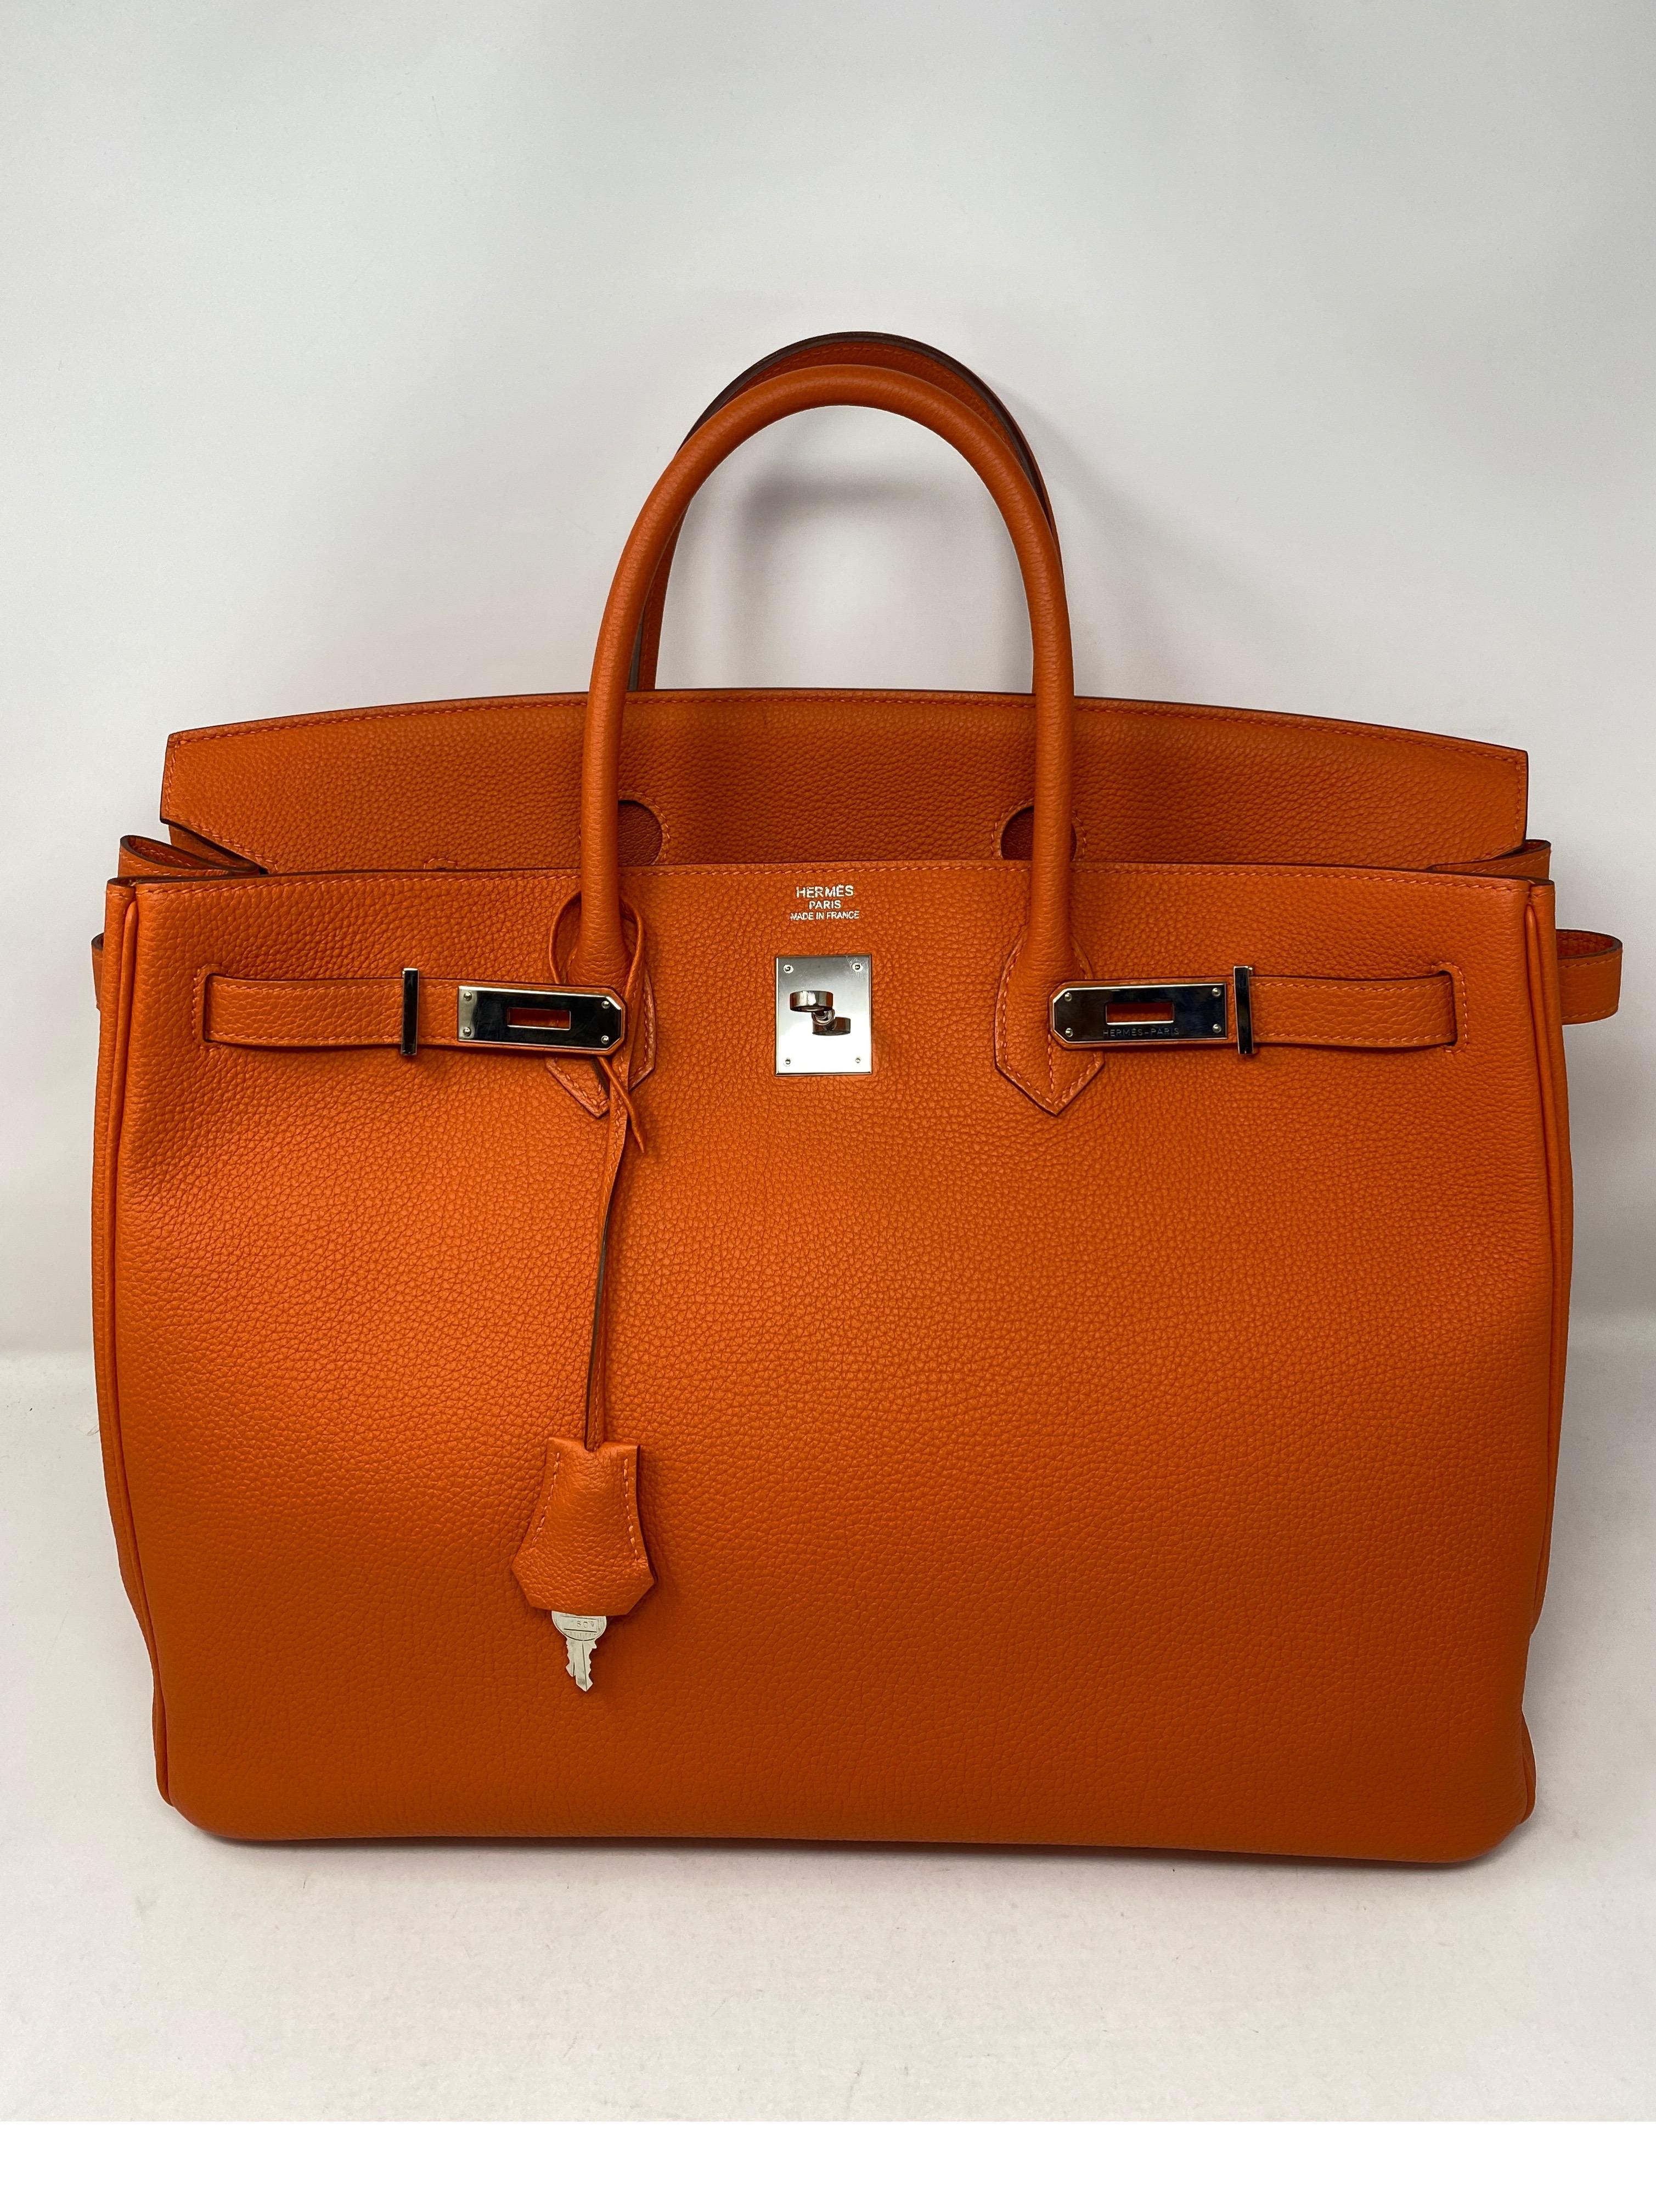 Hermes Birkin 40 Feu Orange. Togo leather. Palladium hardware. From 2015. Excellent condition. Bag looks unworn. Client kept in dust cover. Full set. Comes with original box, dust cover, clochette, lock, keys. And original receipt. Guaranteed